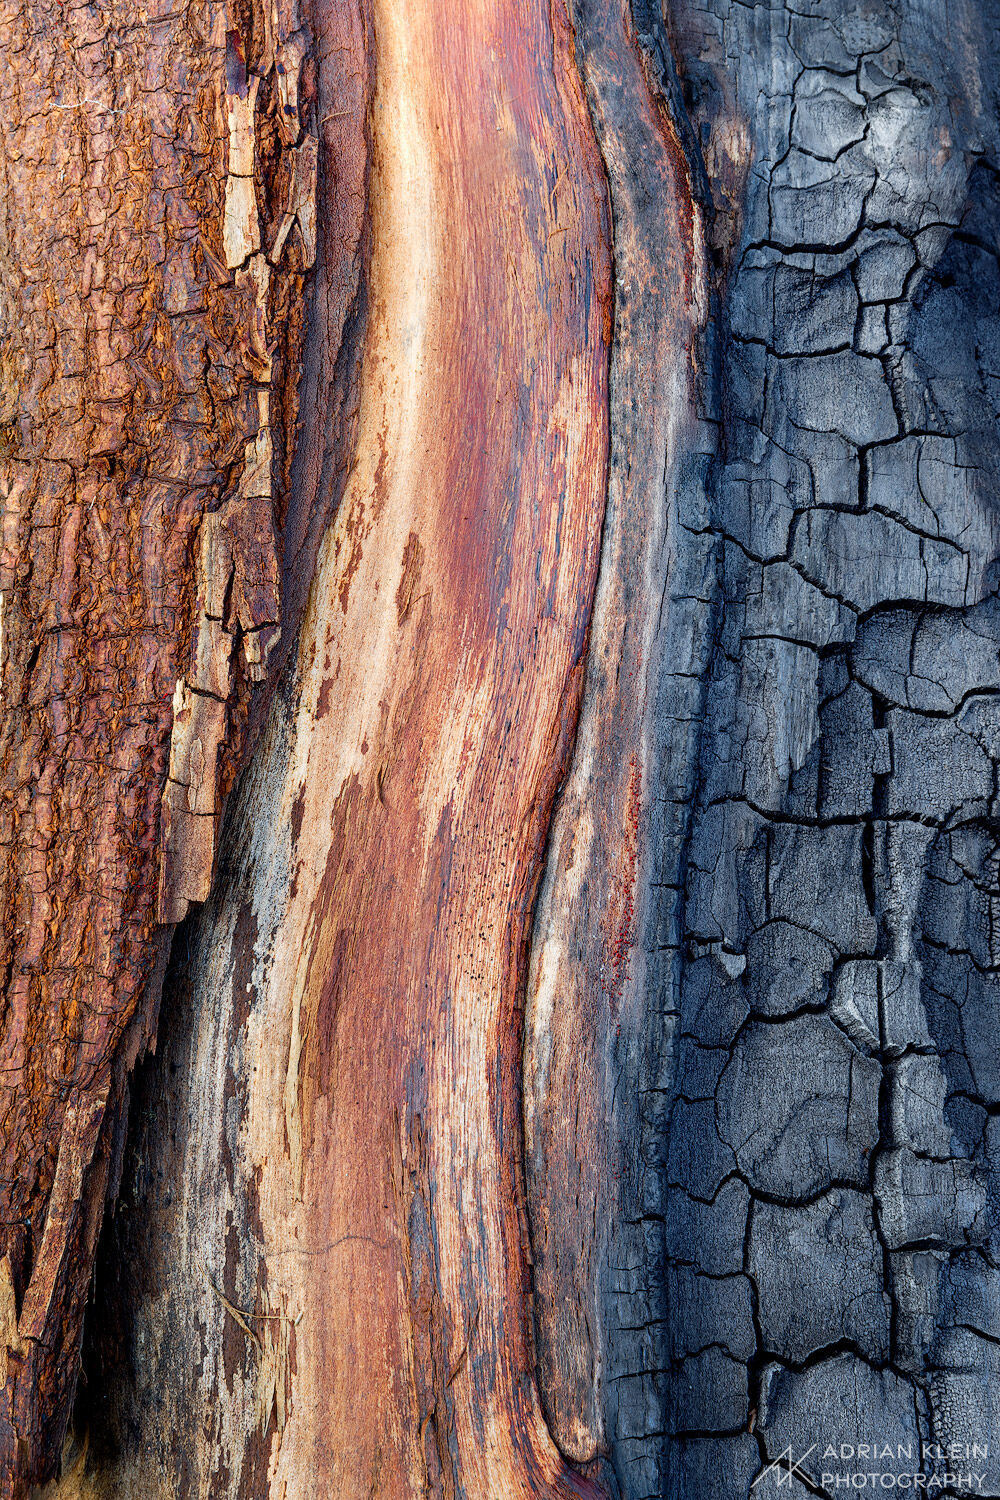 A large log from a burned tree showing three distinct layers. Columbia River Gorge, Oregon.